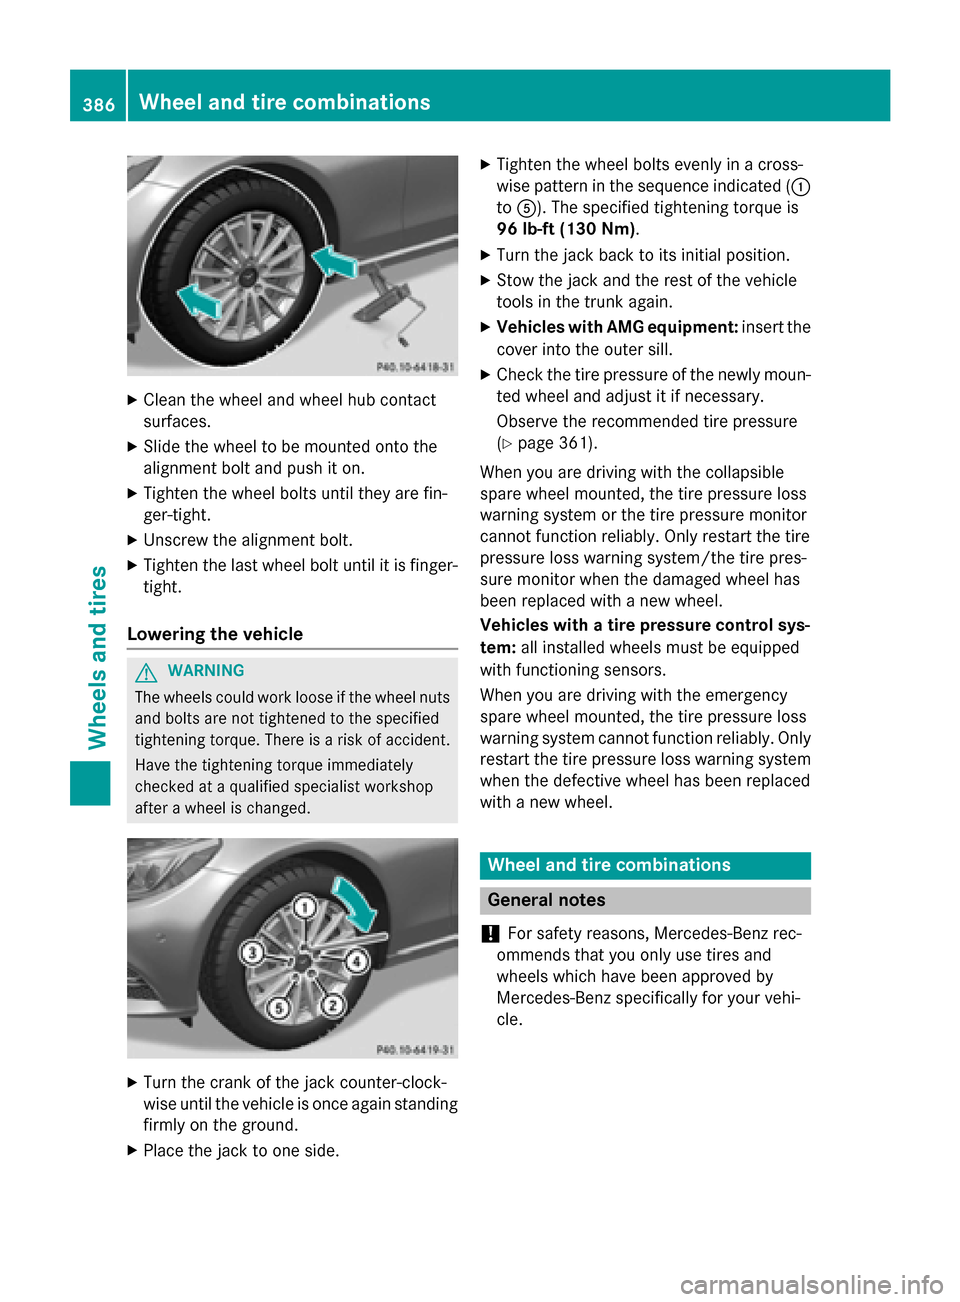 MERCEDES-BENZ C-Class SEDAN 2015 W205 Owners Manual X
Clean the wheel and wheel hub contact
surfaces.
X Slide the wheel to be mounted onto the
alignment bolt and push it on.
X Tighten the wheel bolts until they are fin-
ger-tight.
X Unscrew the alignme